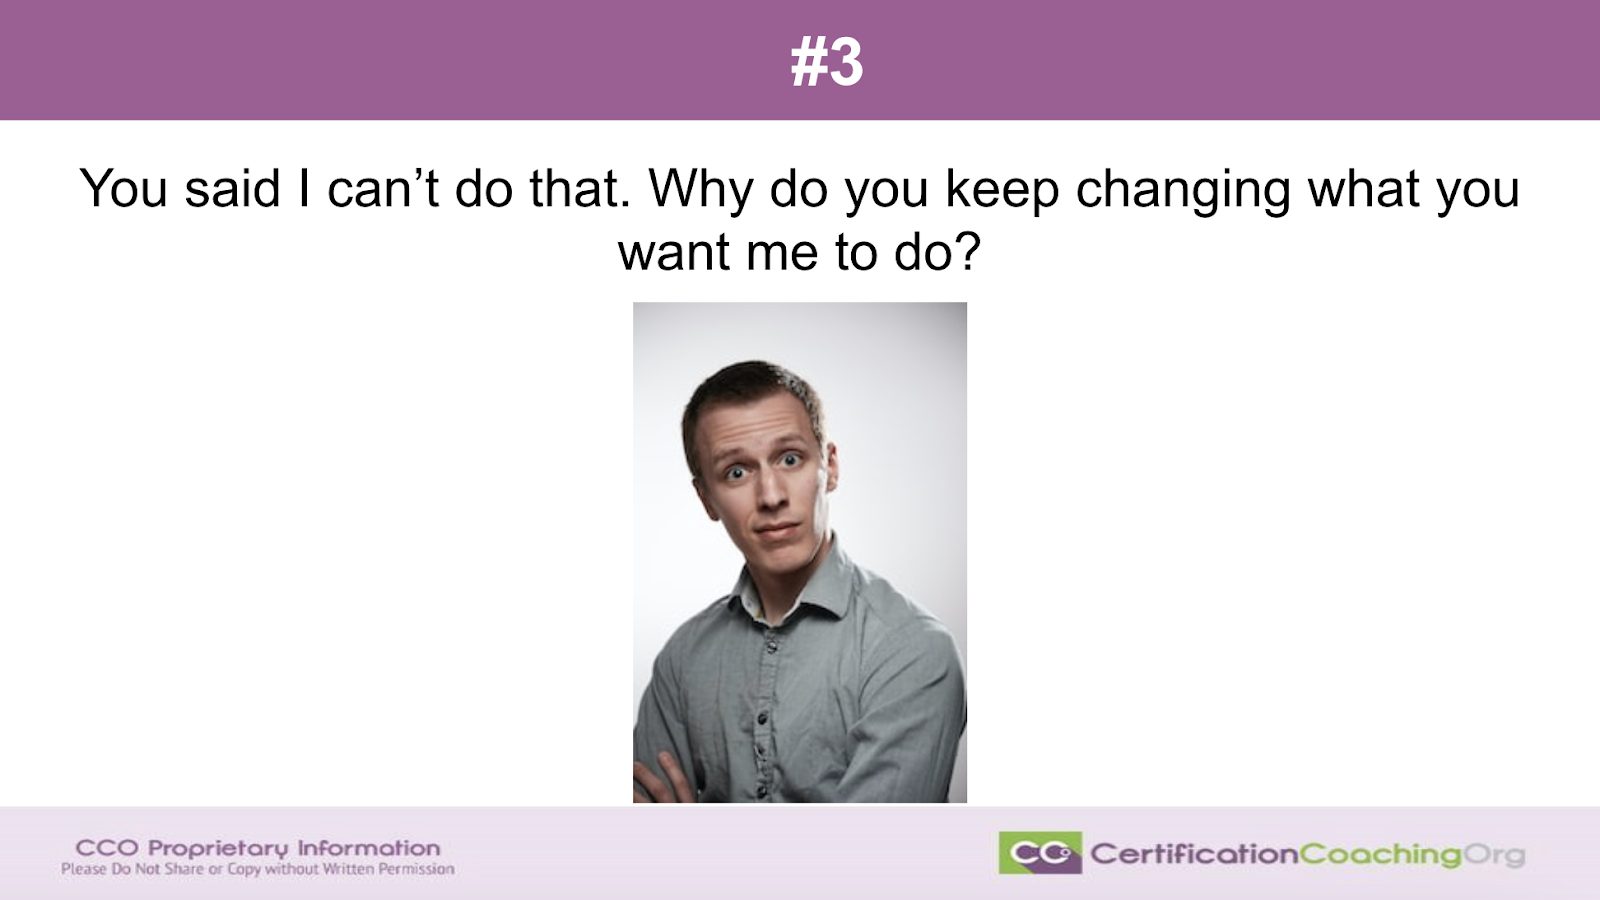 #3 You Said I Can't Do That. Why Do You Keep Changing What You Want Me To Do?